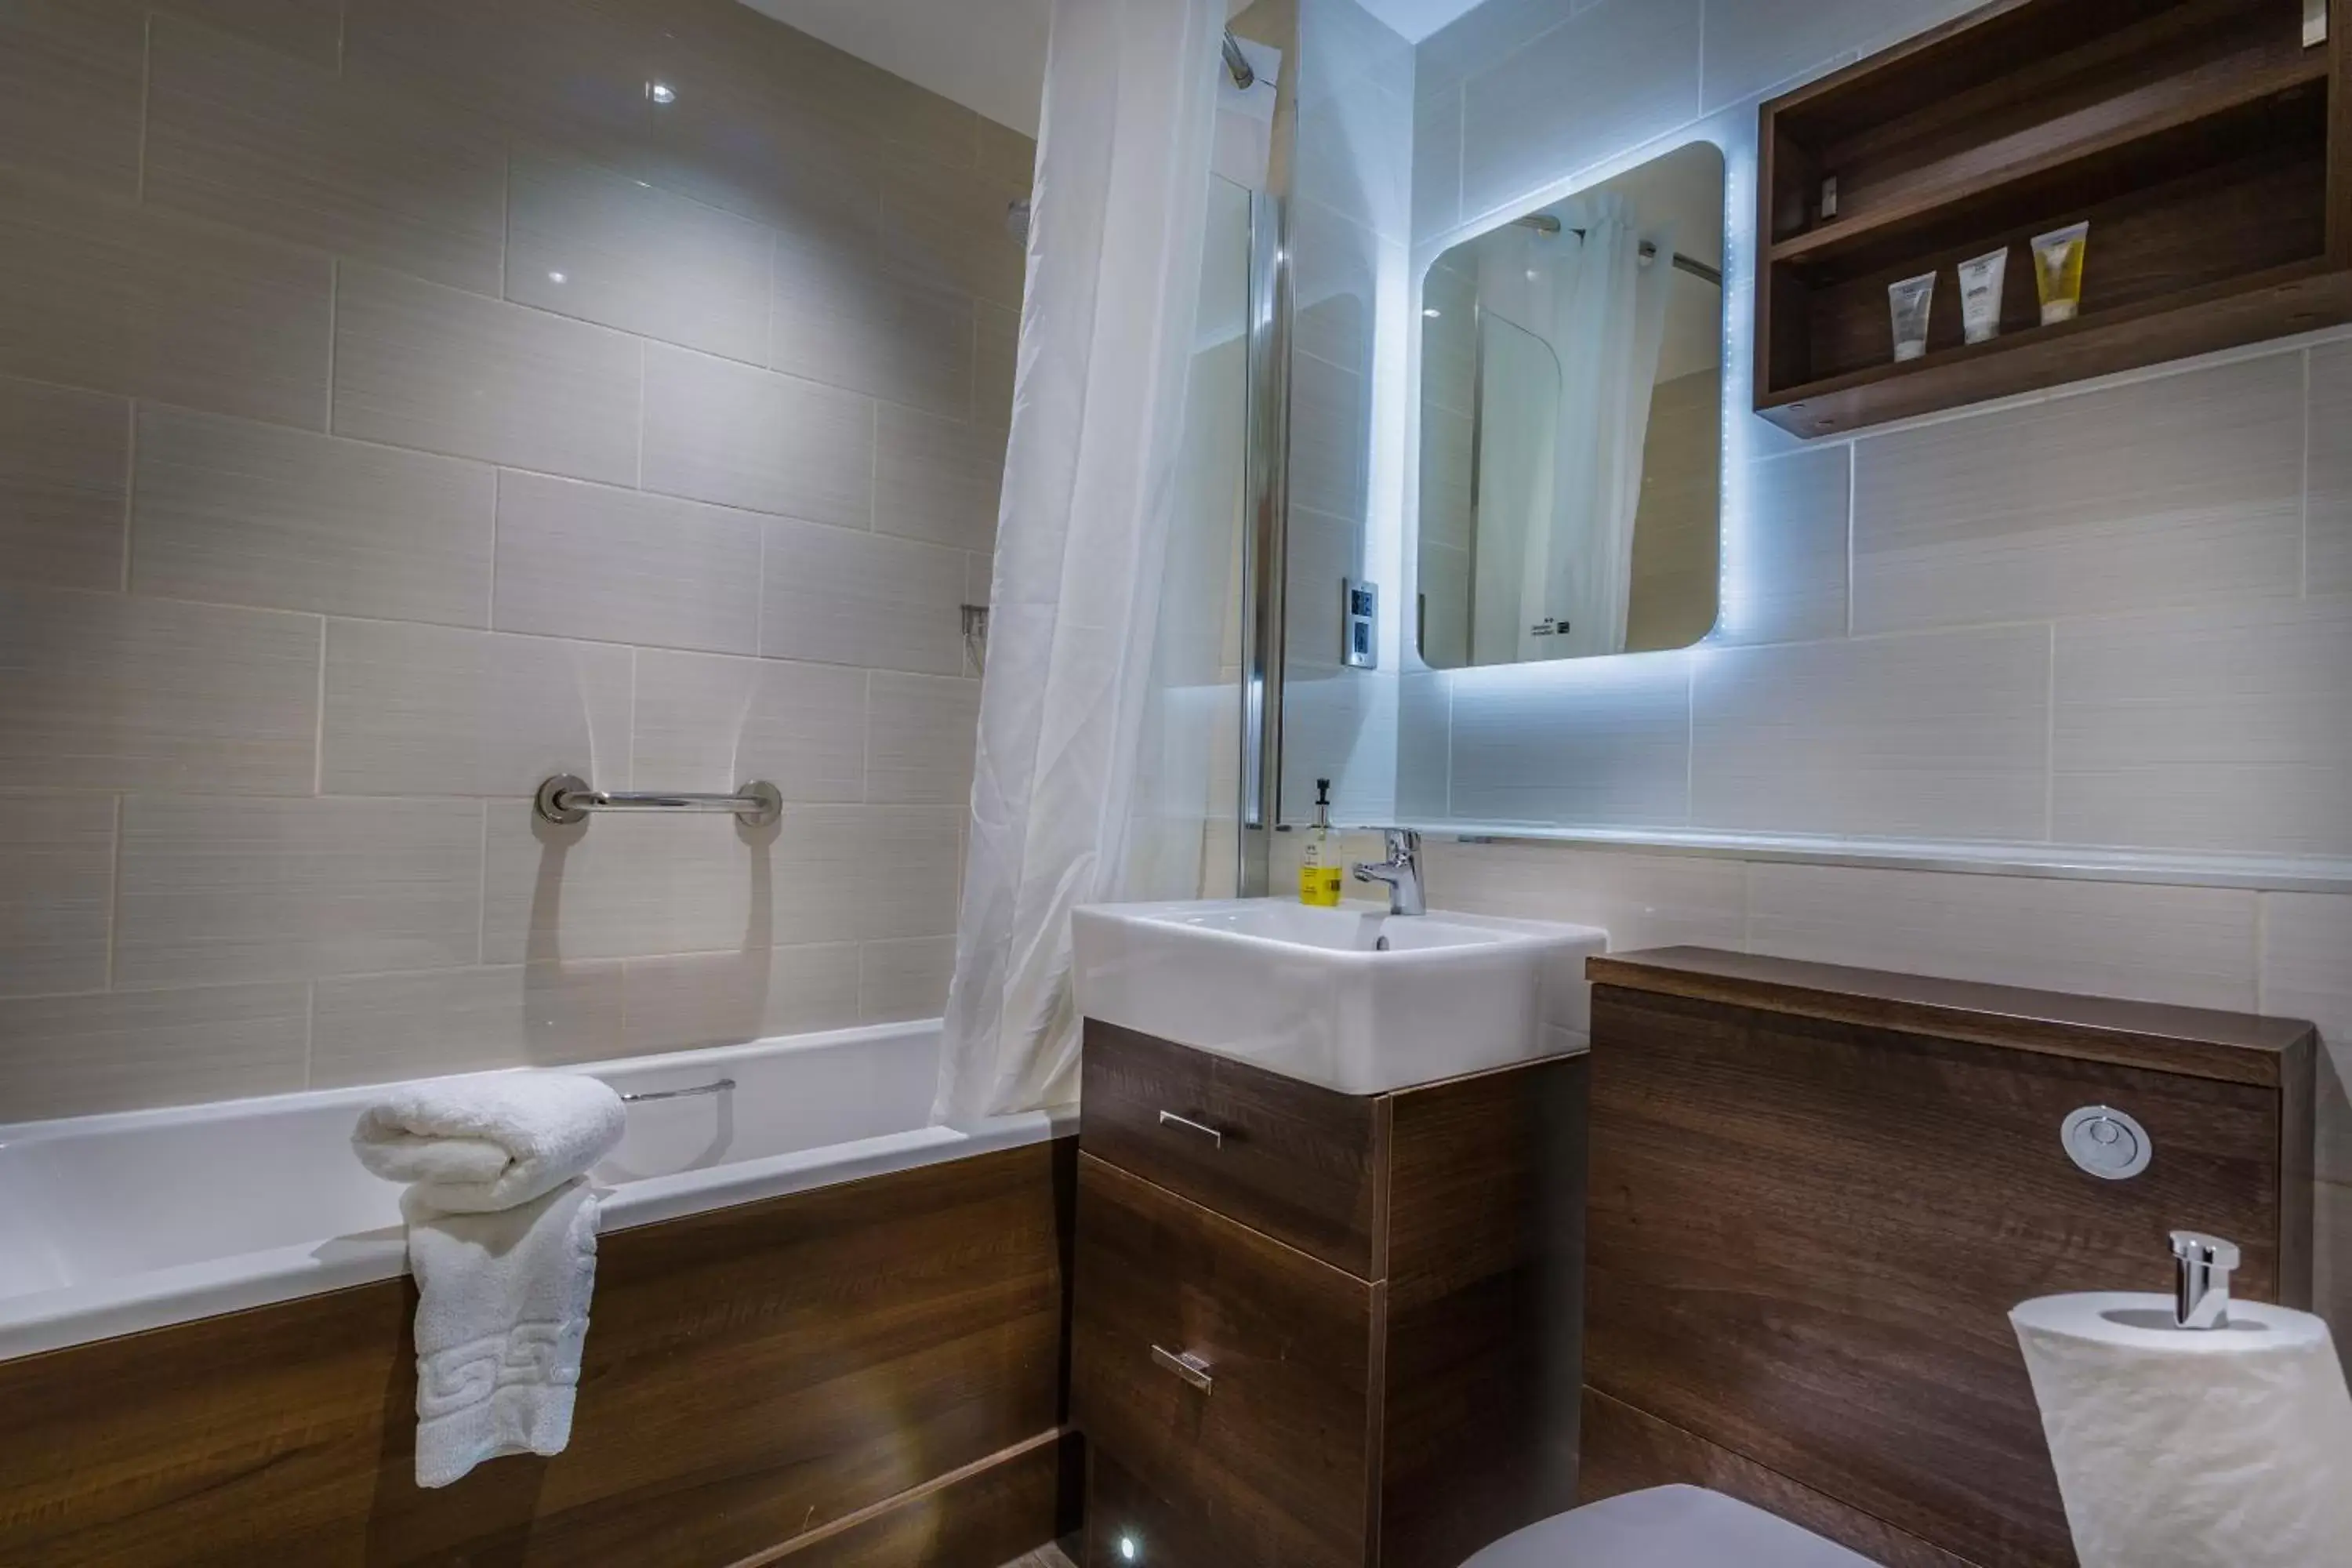 Bathroom in The Admiral Rodney Hotel, Horncastle, Lincolnshire